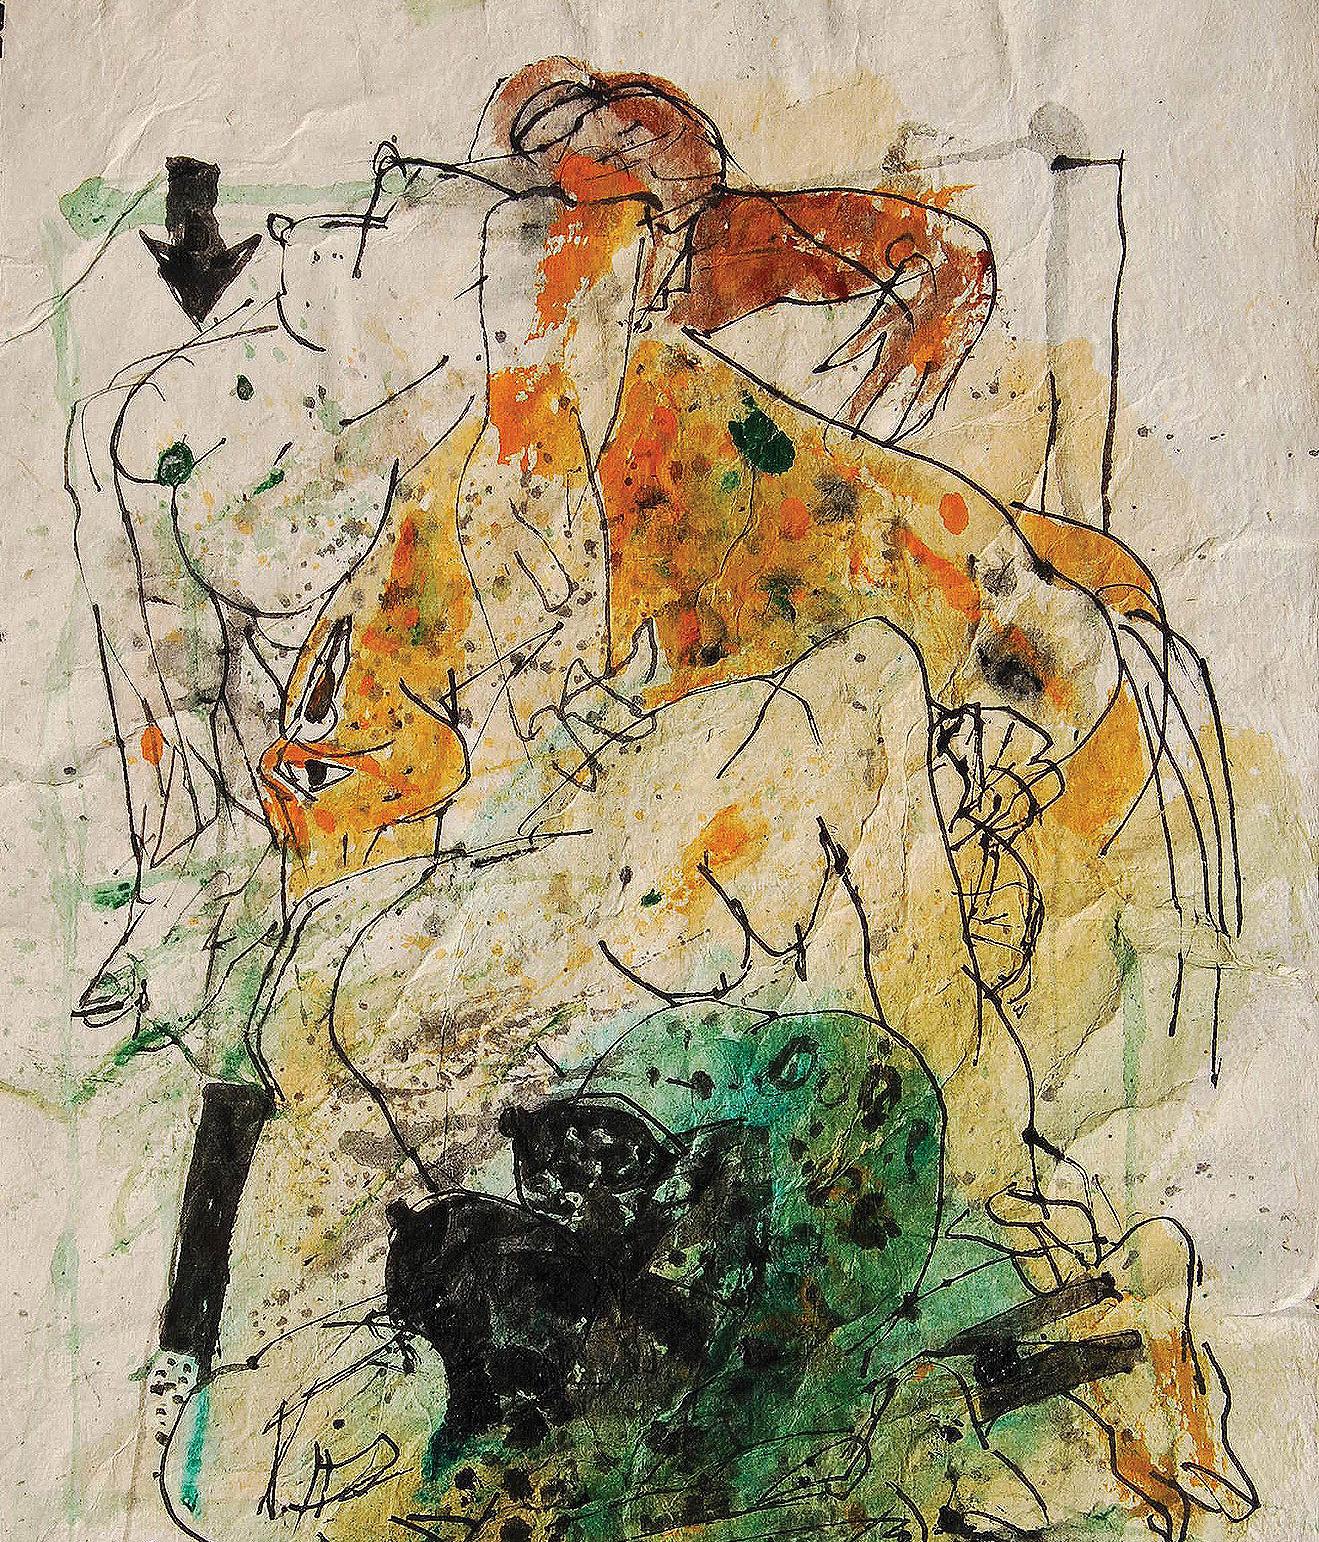 Sunil Das - Colour based Drawings III - 13.5 x 9.5 inches (unframed size)
Acrylic, Watercolor, Pen & Ink on Handmade Paper
Inclusive of shipment in ready to hang form.

Sunil Das (1939-2015) was a Master Modern Indian Artist from Bengal. Extremely